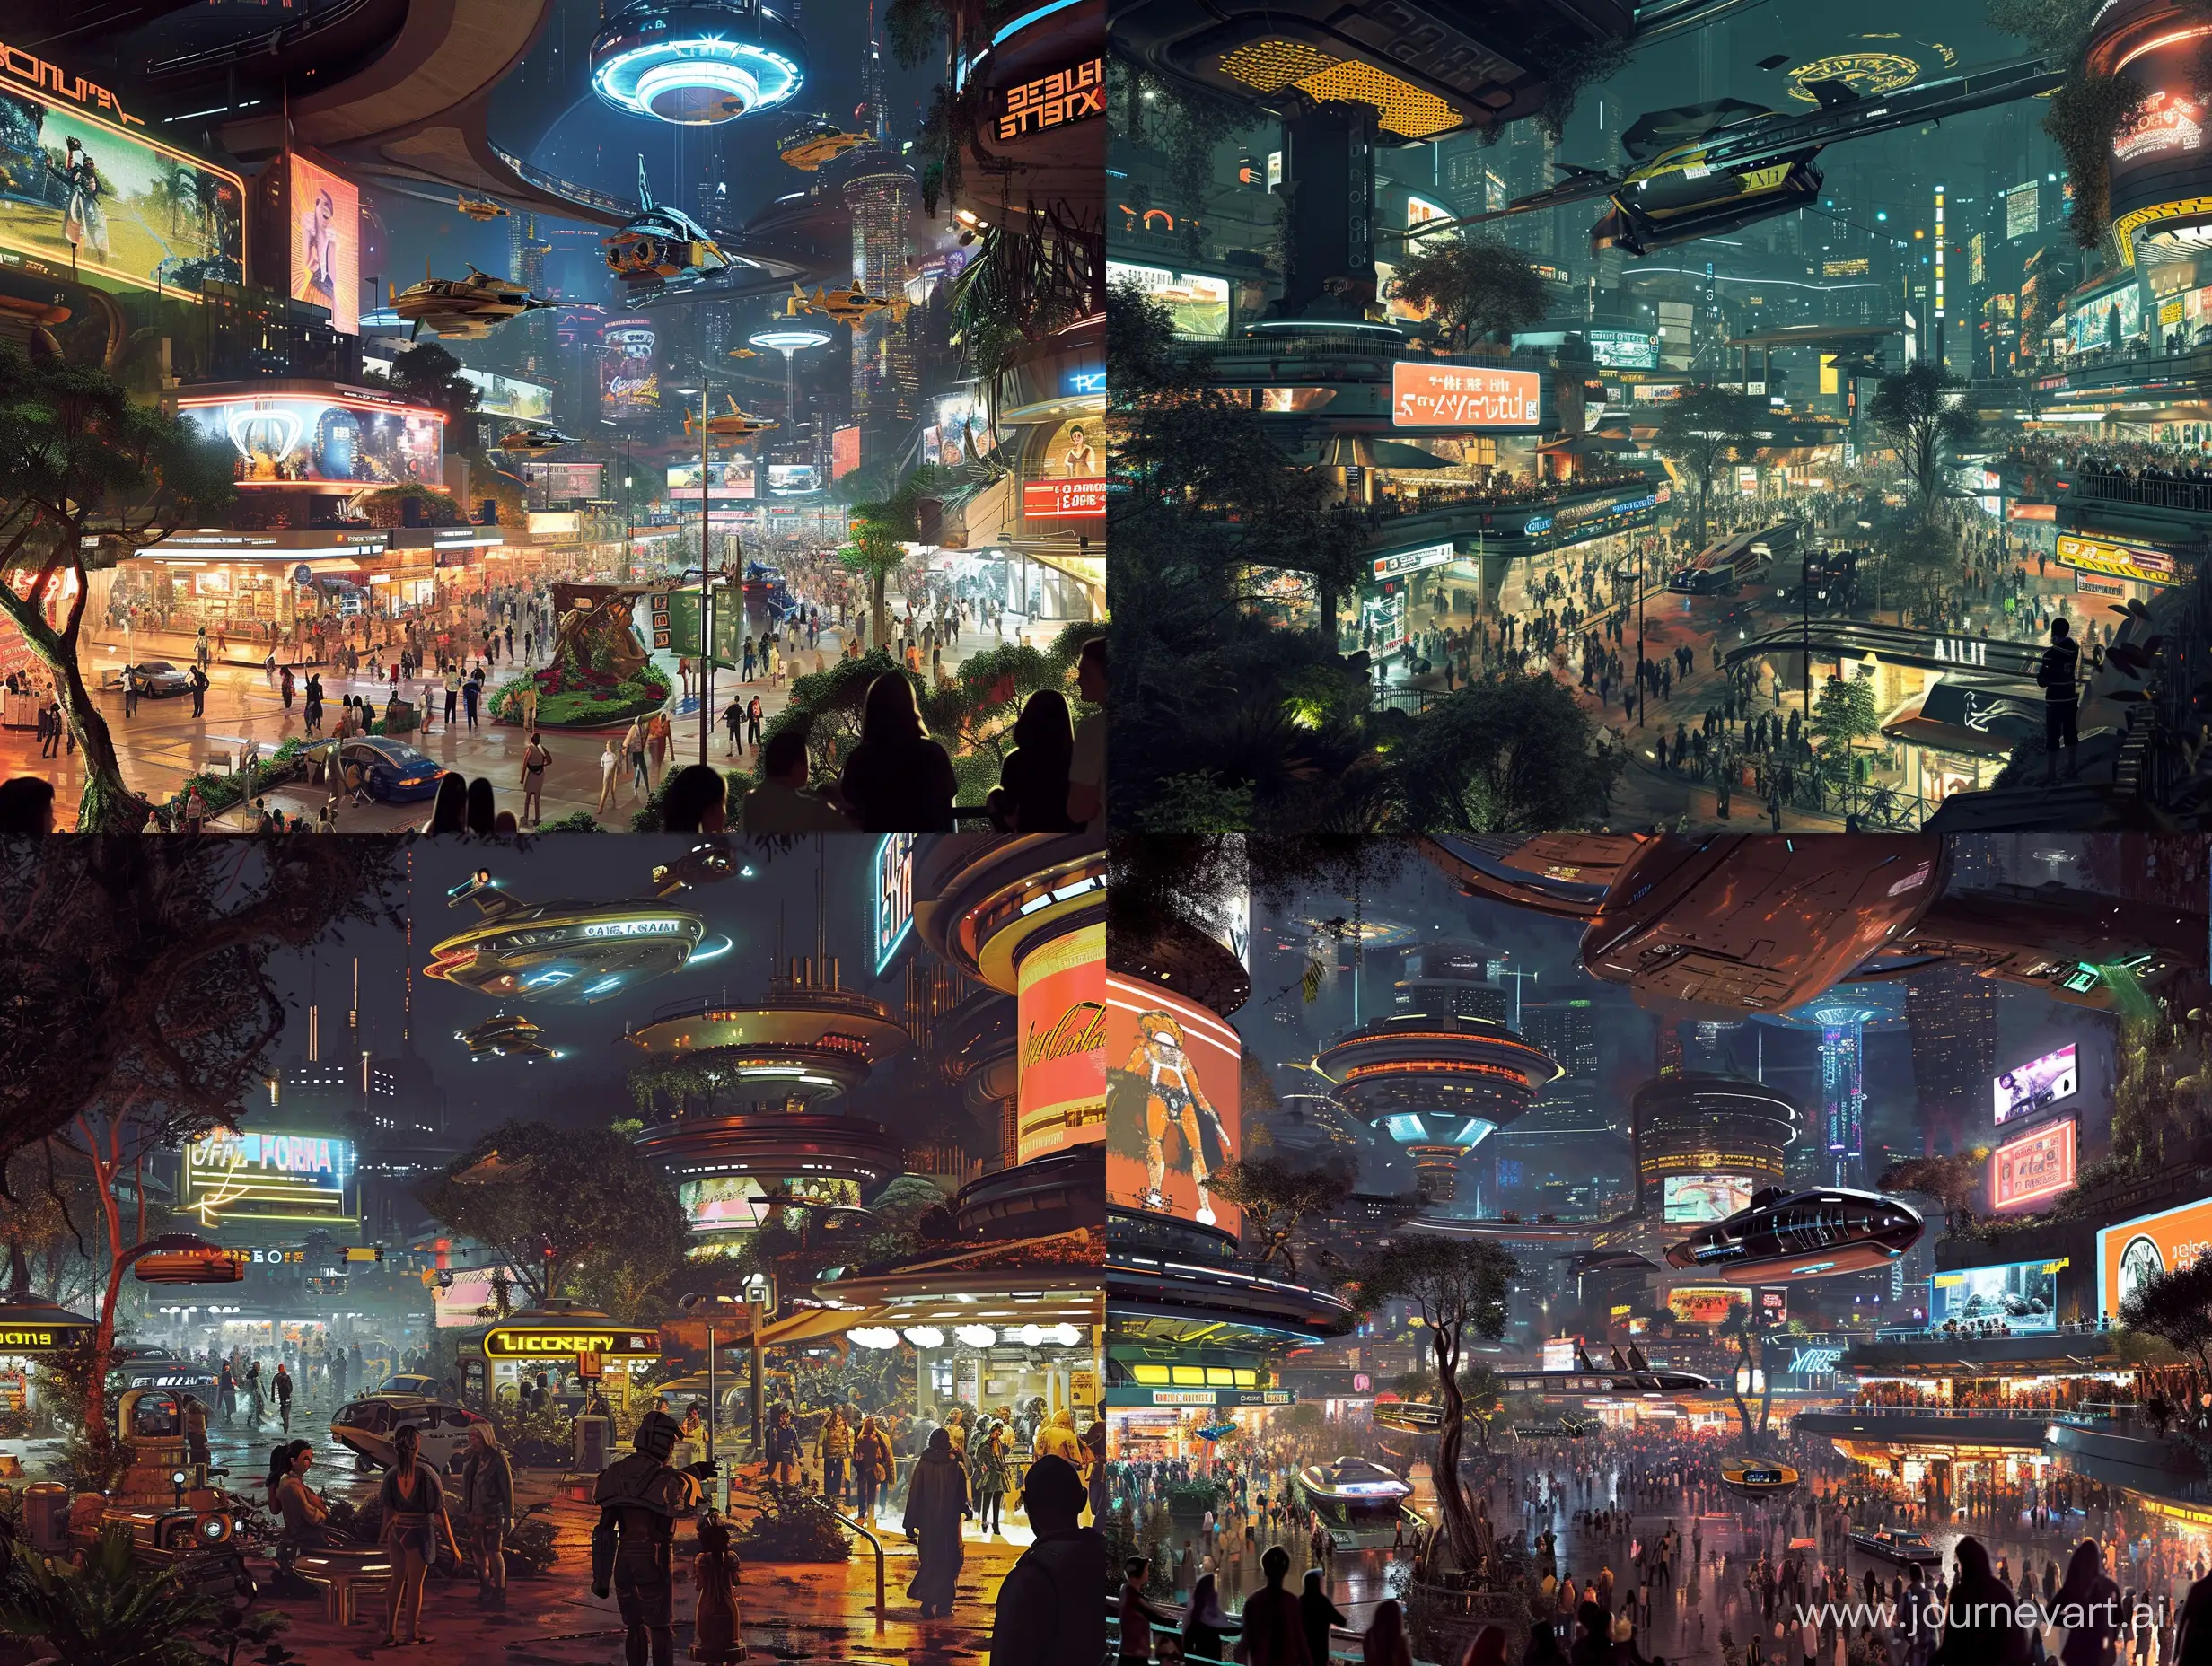 Bustling-RetroFuturistic-Cityscape-Vibrant-1970s-SciFi-Blended-with-Modern-Marvels